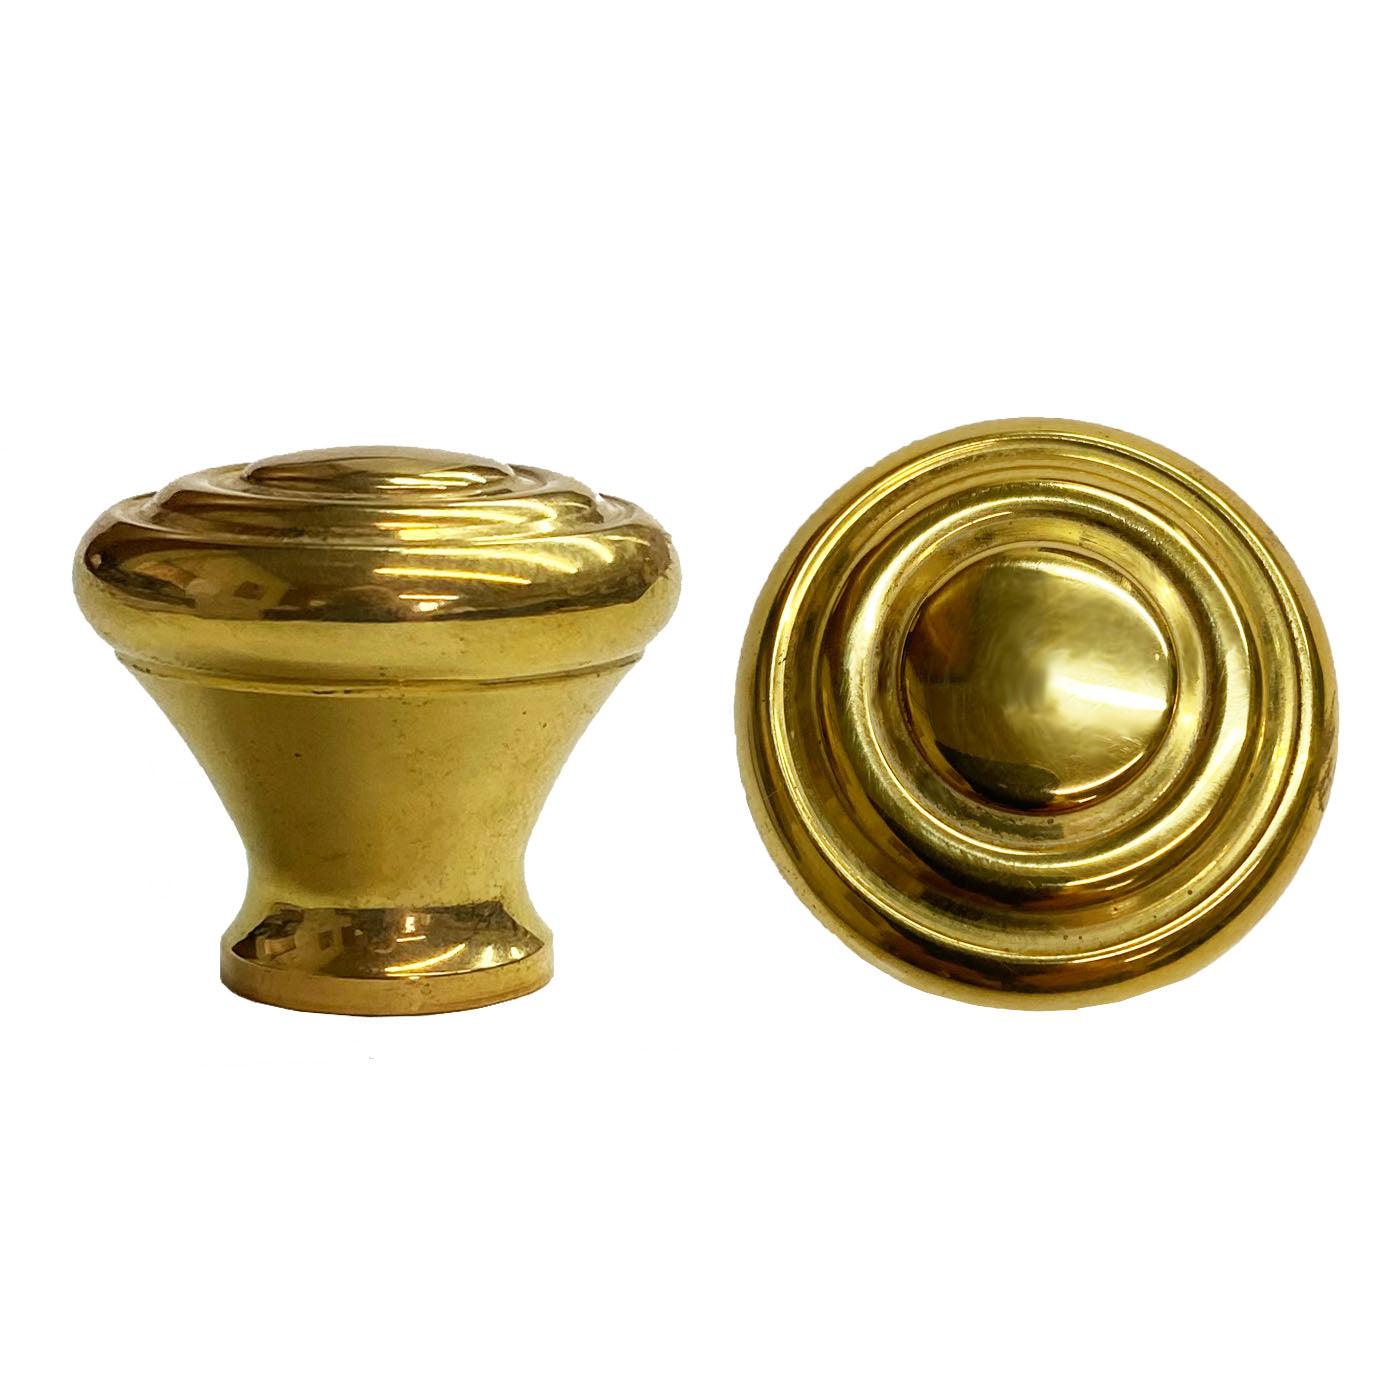 Tiazza 4pcs Round Solid Brass Knobs Antique Cabinet Drawer Small